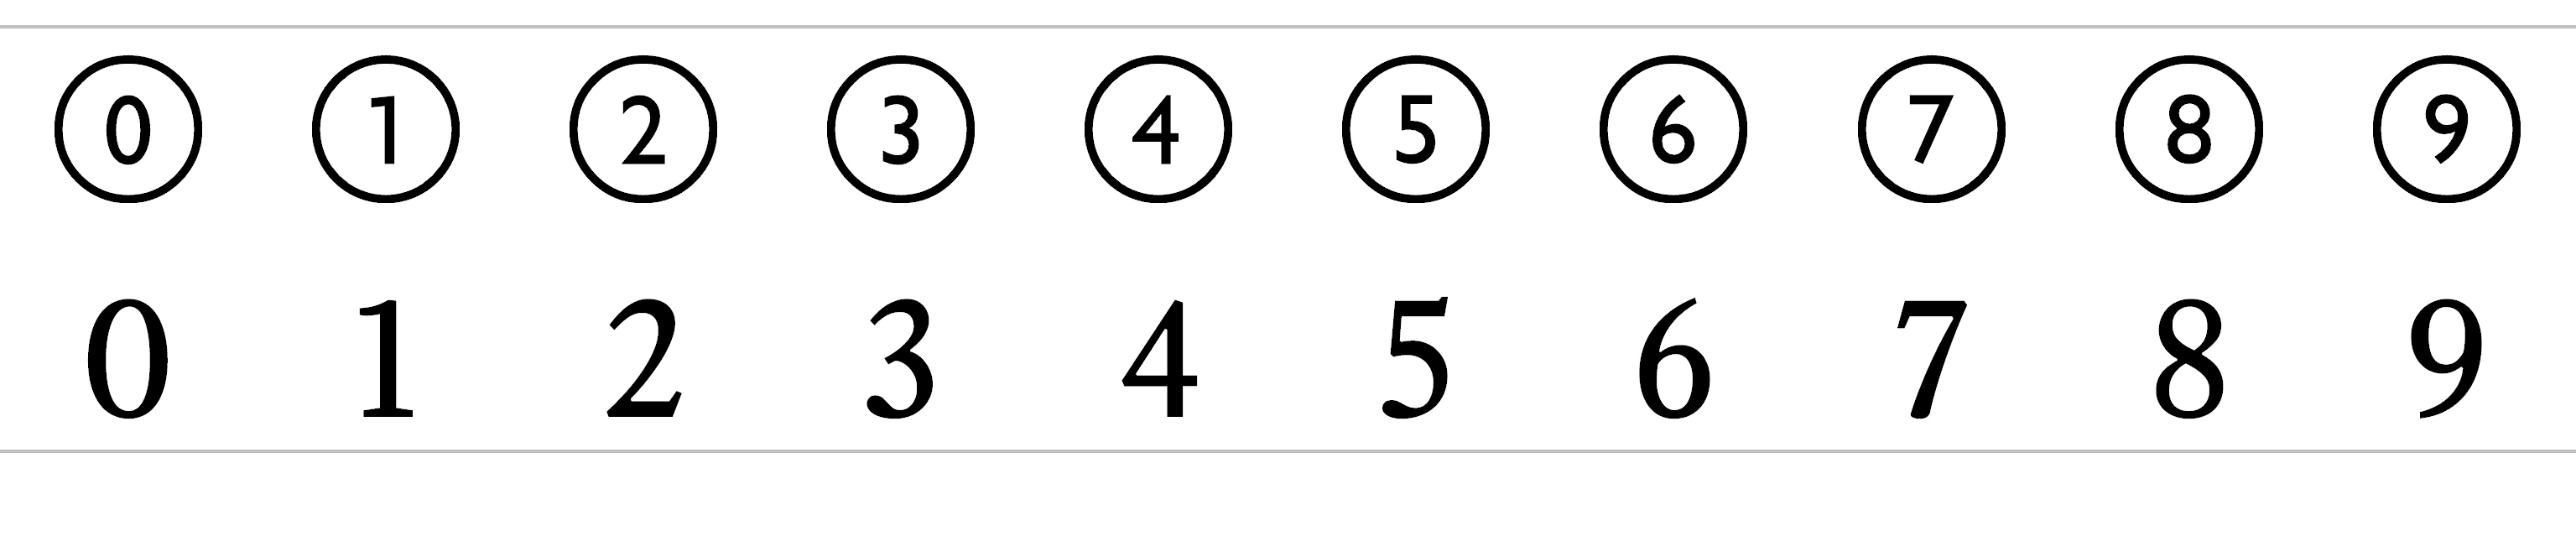 Table 9.13 - PS Index, mapped to numerical characters